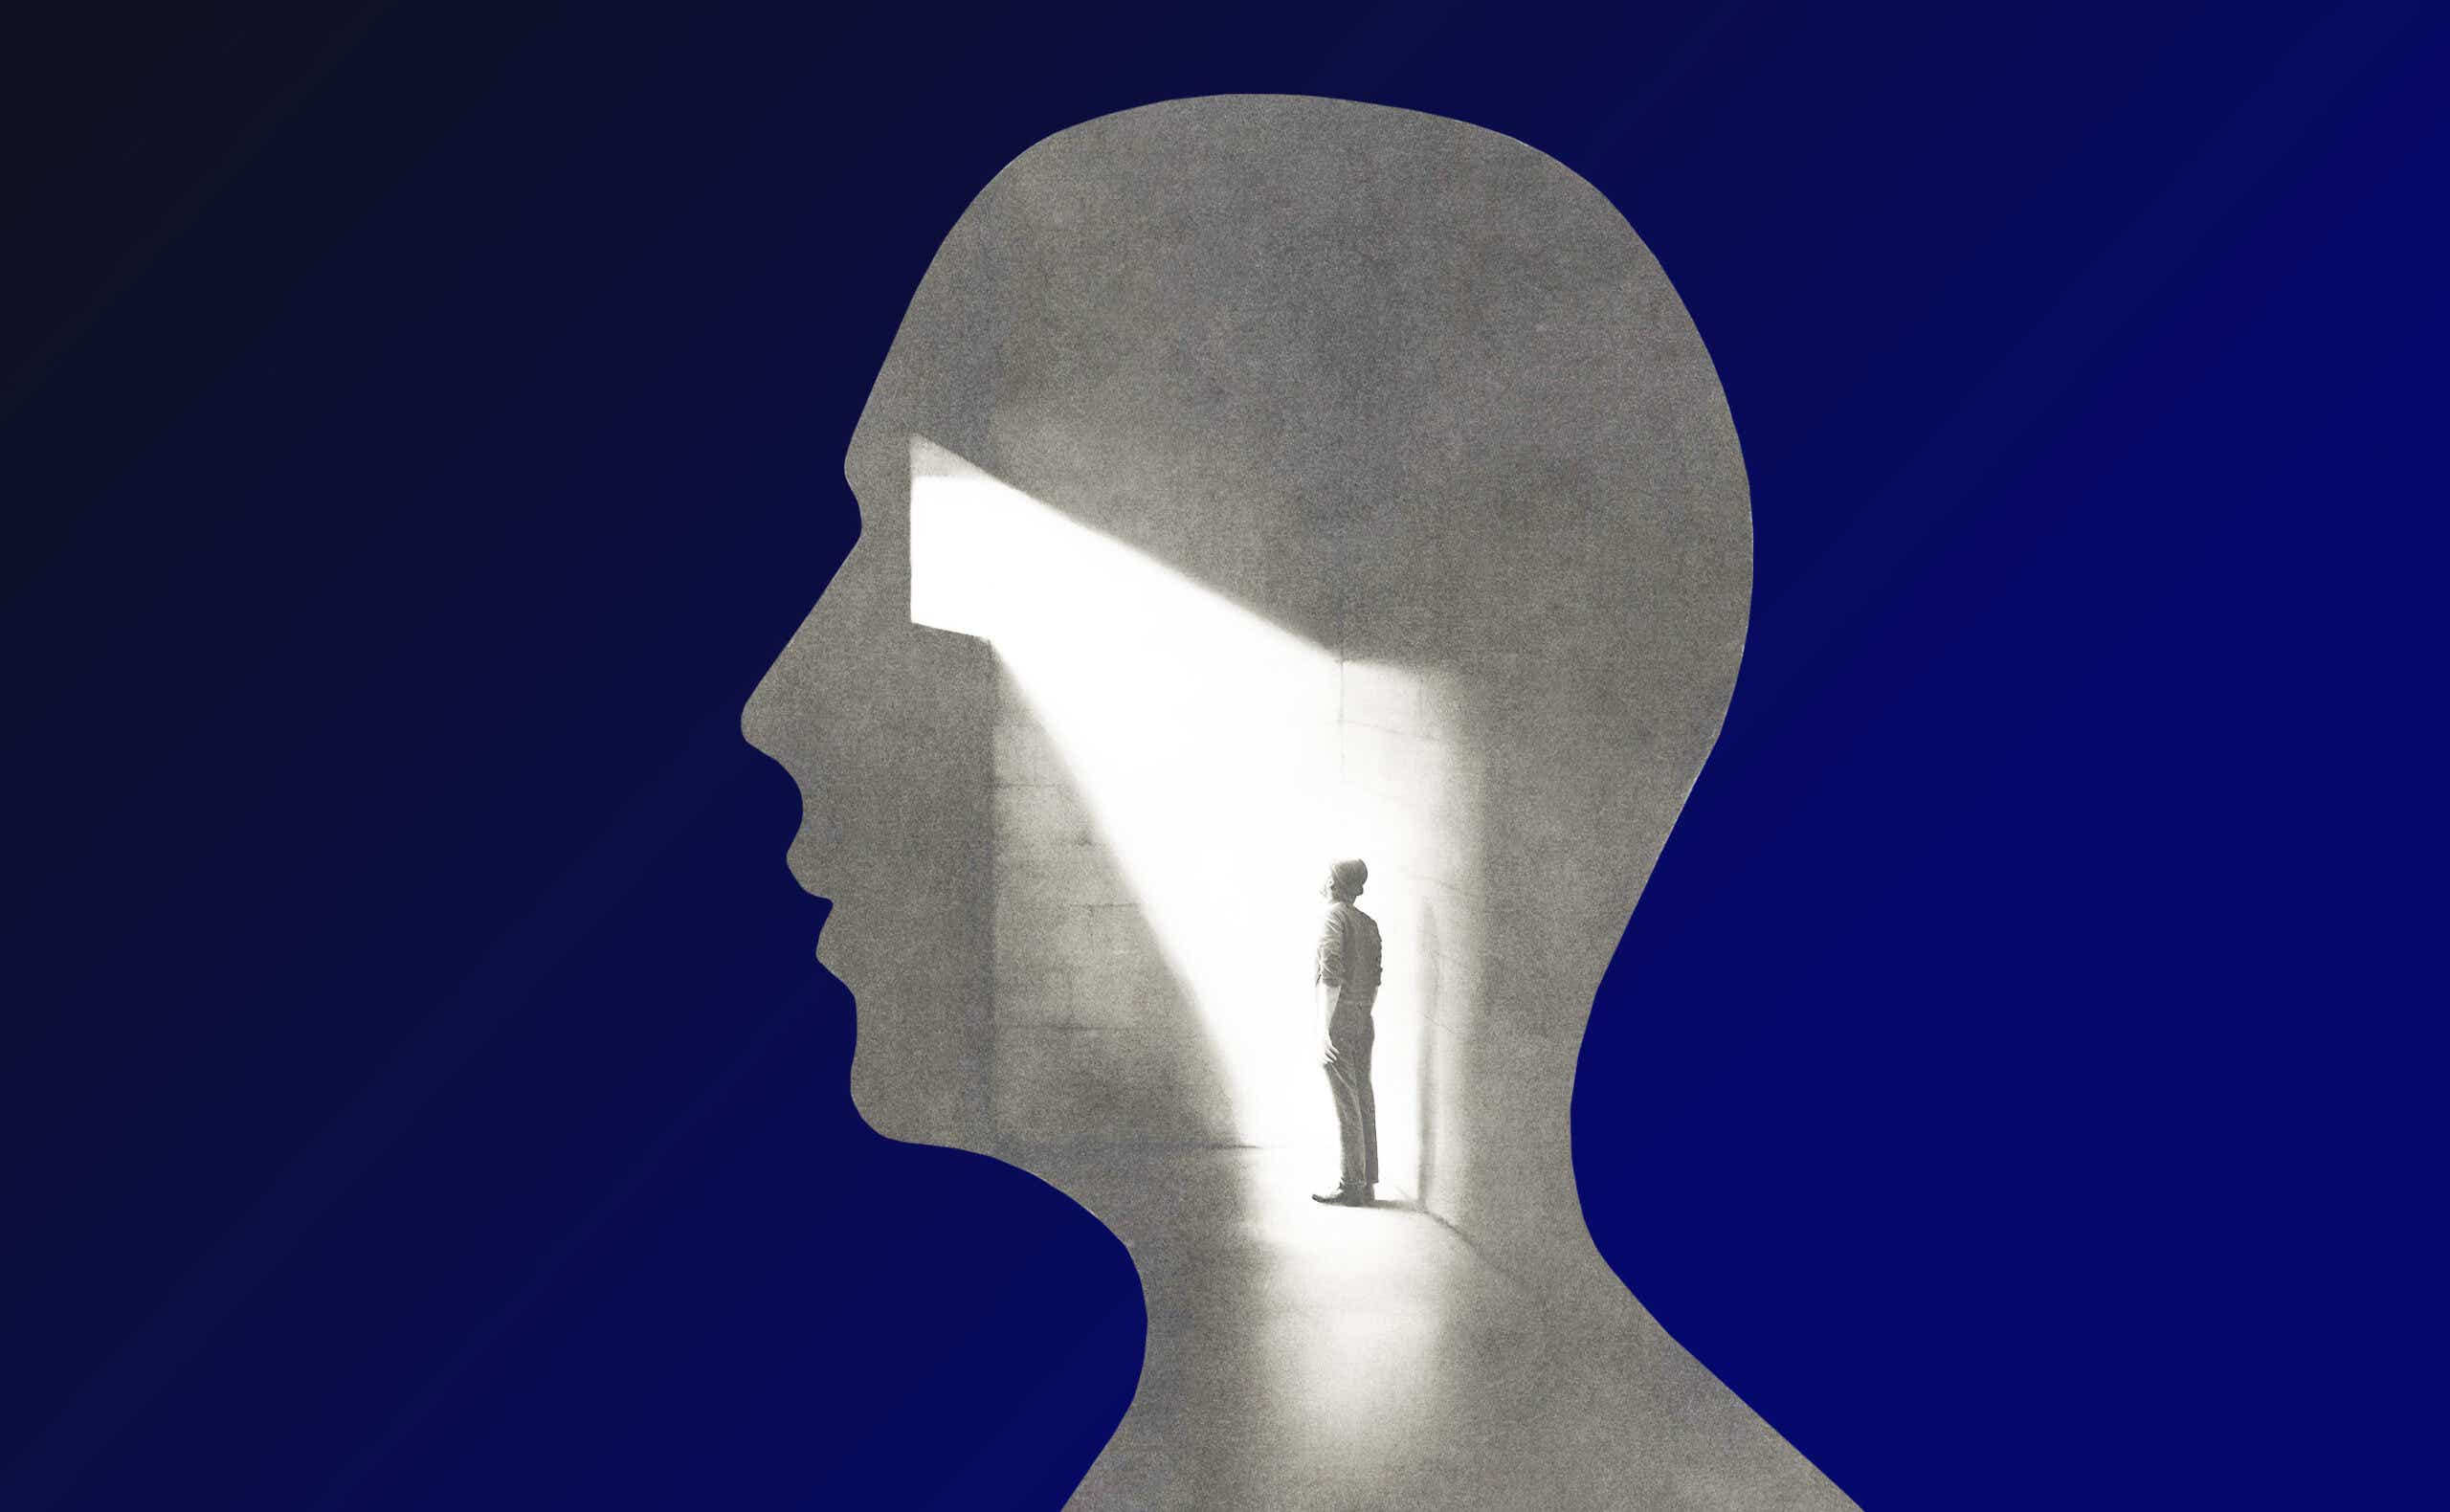 a man stands isolated inside a head